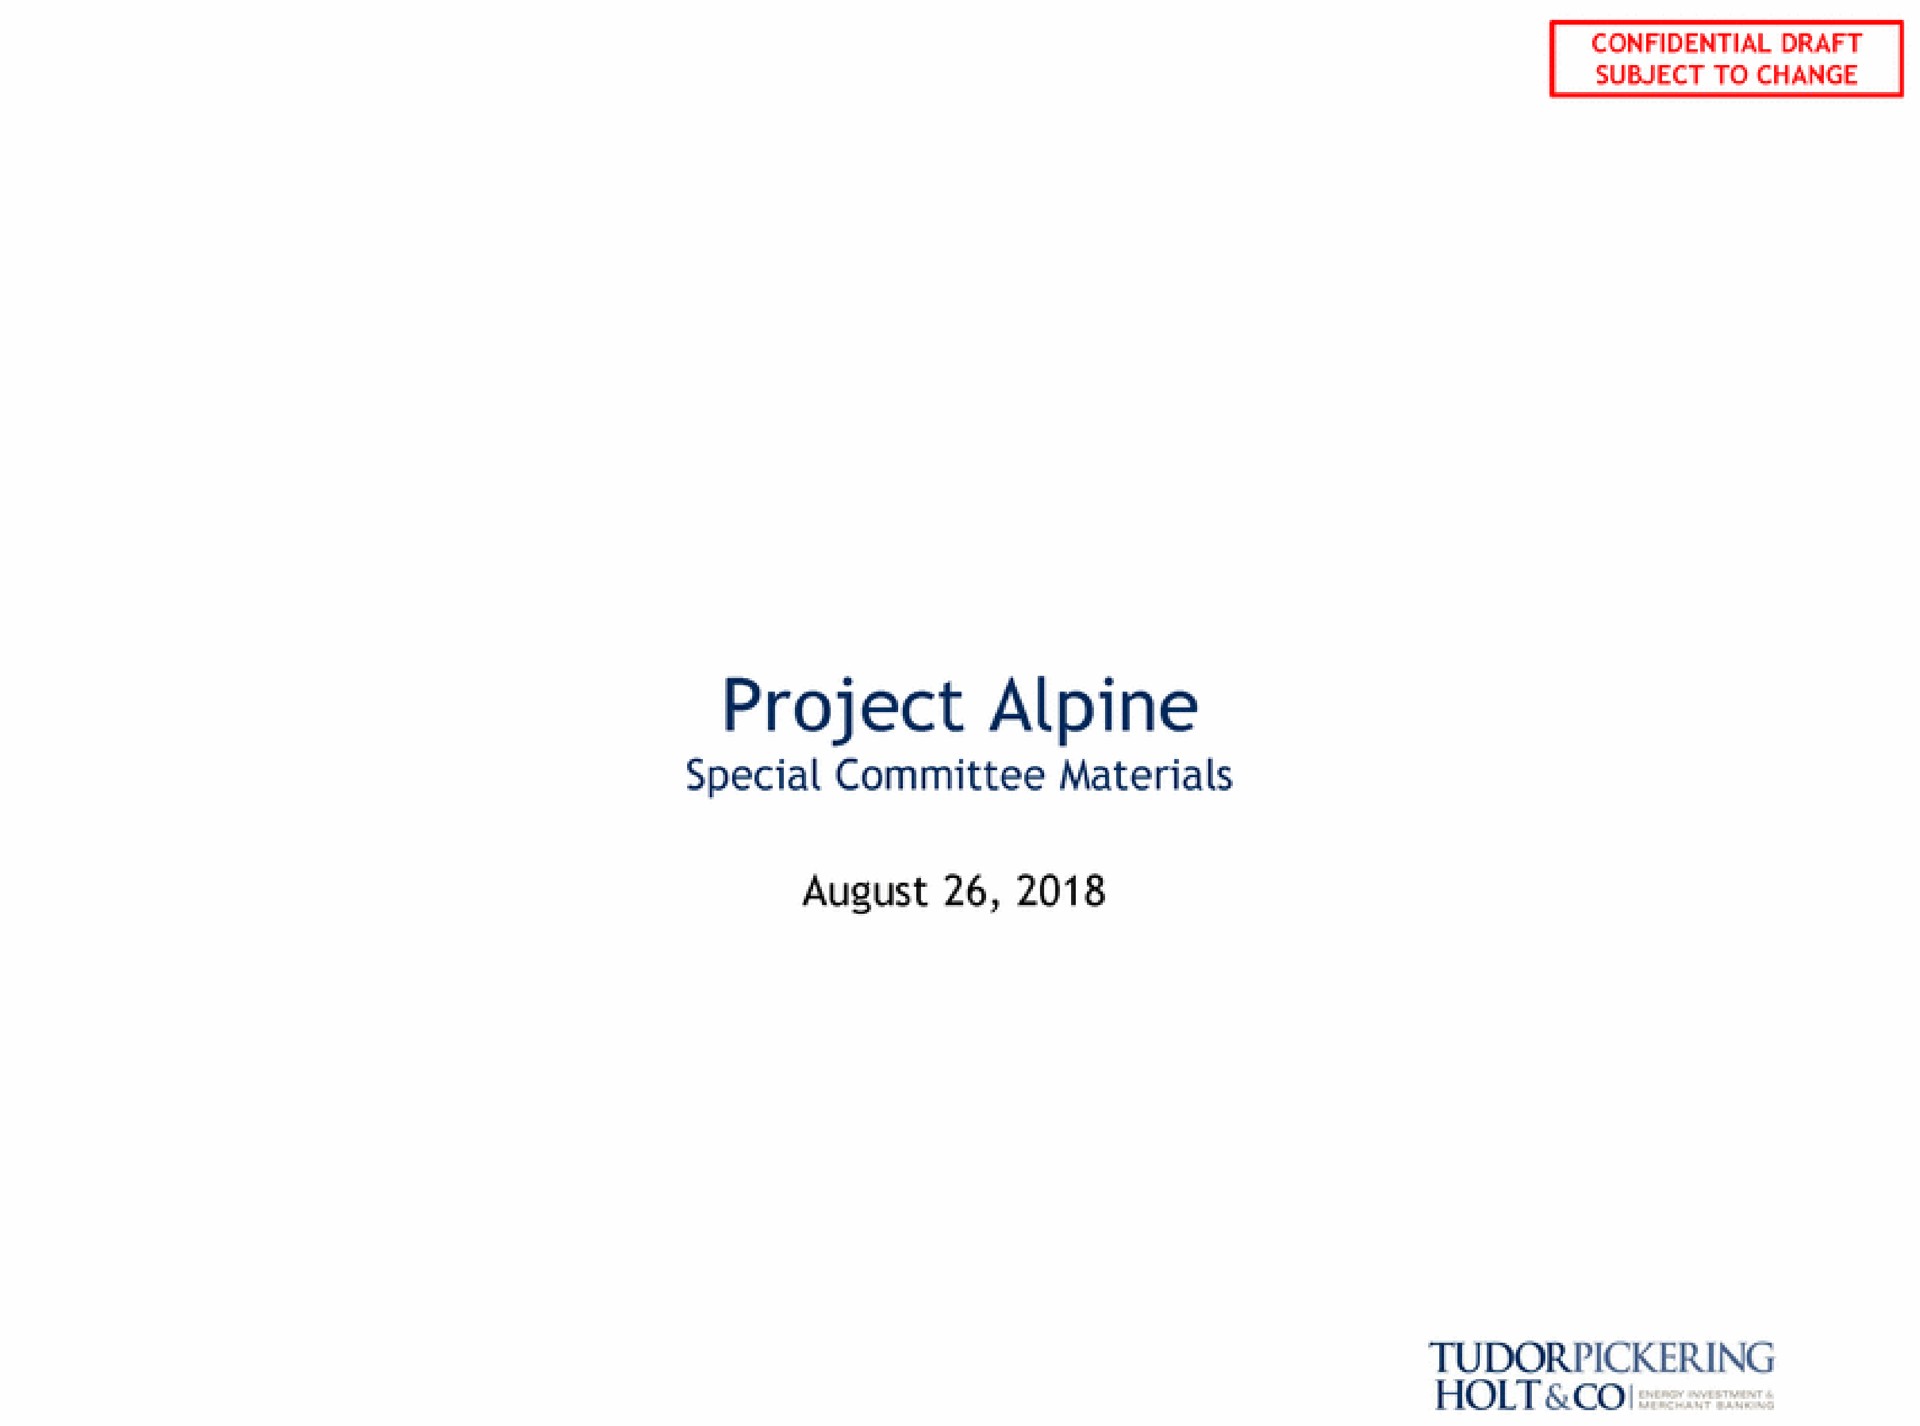 project alpine august holt | Tudor, Pickering, Holt & Co